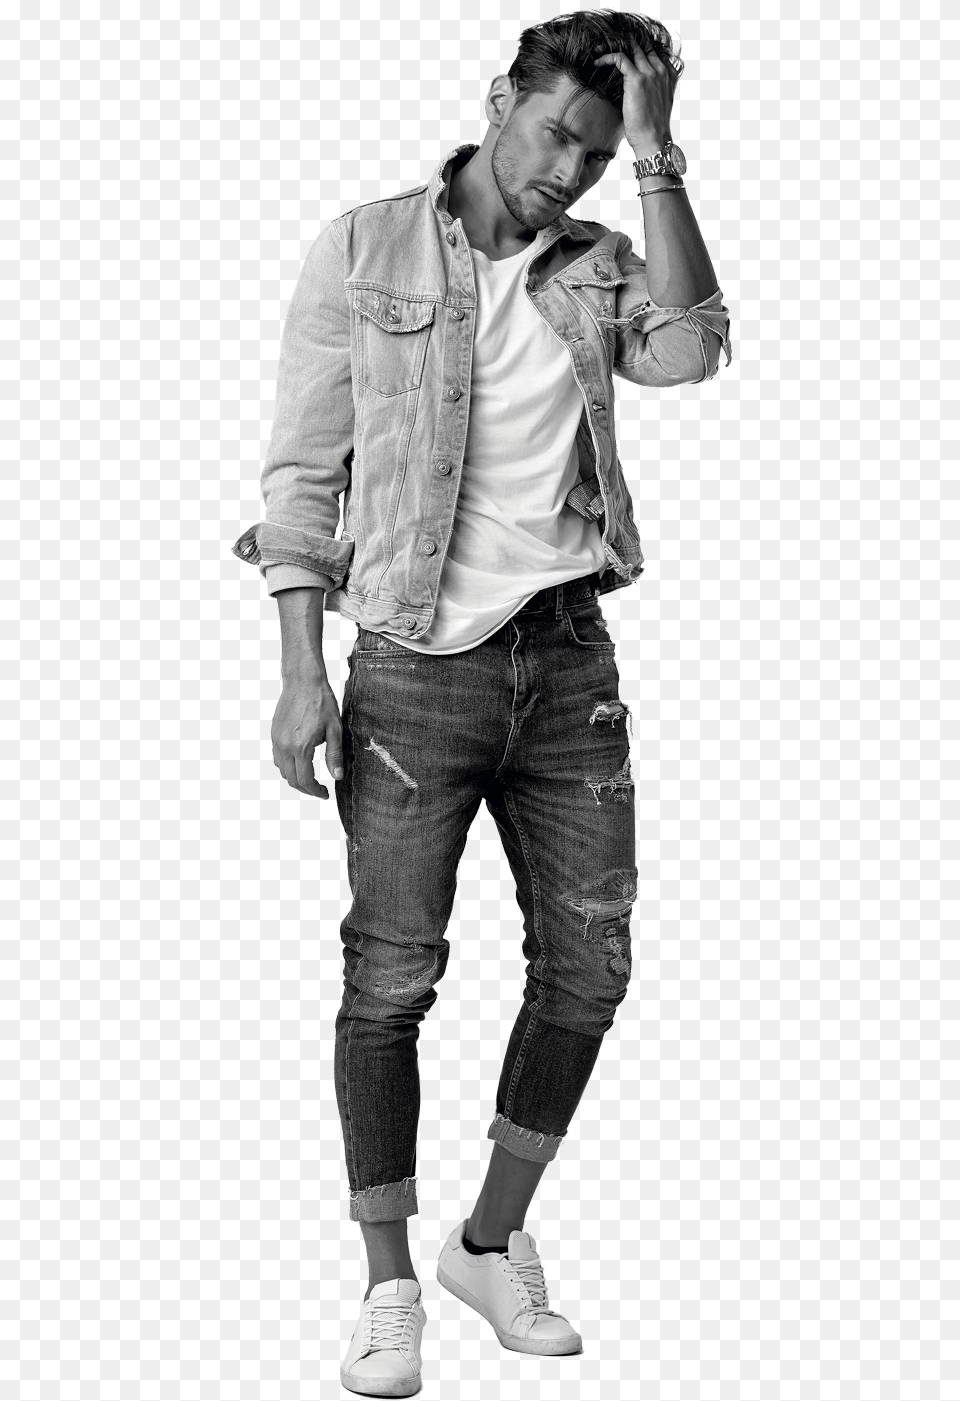 Standing, Jeans, Clothing, Shoe, Pants Png Image